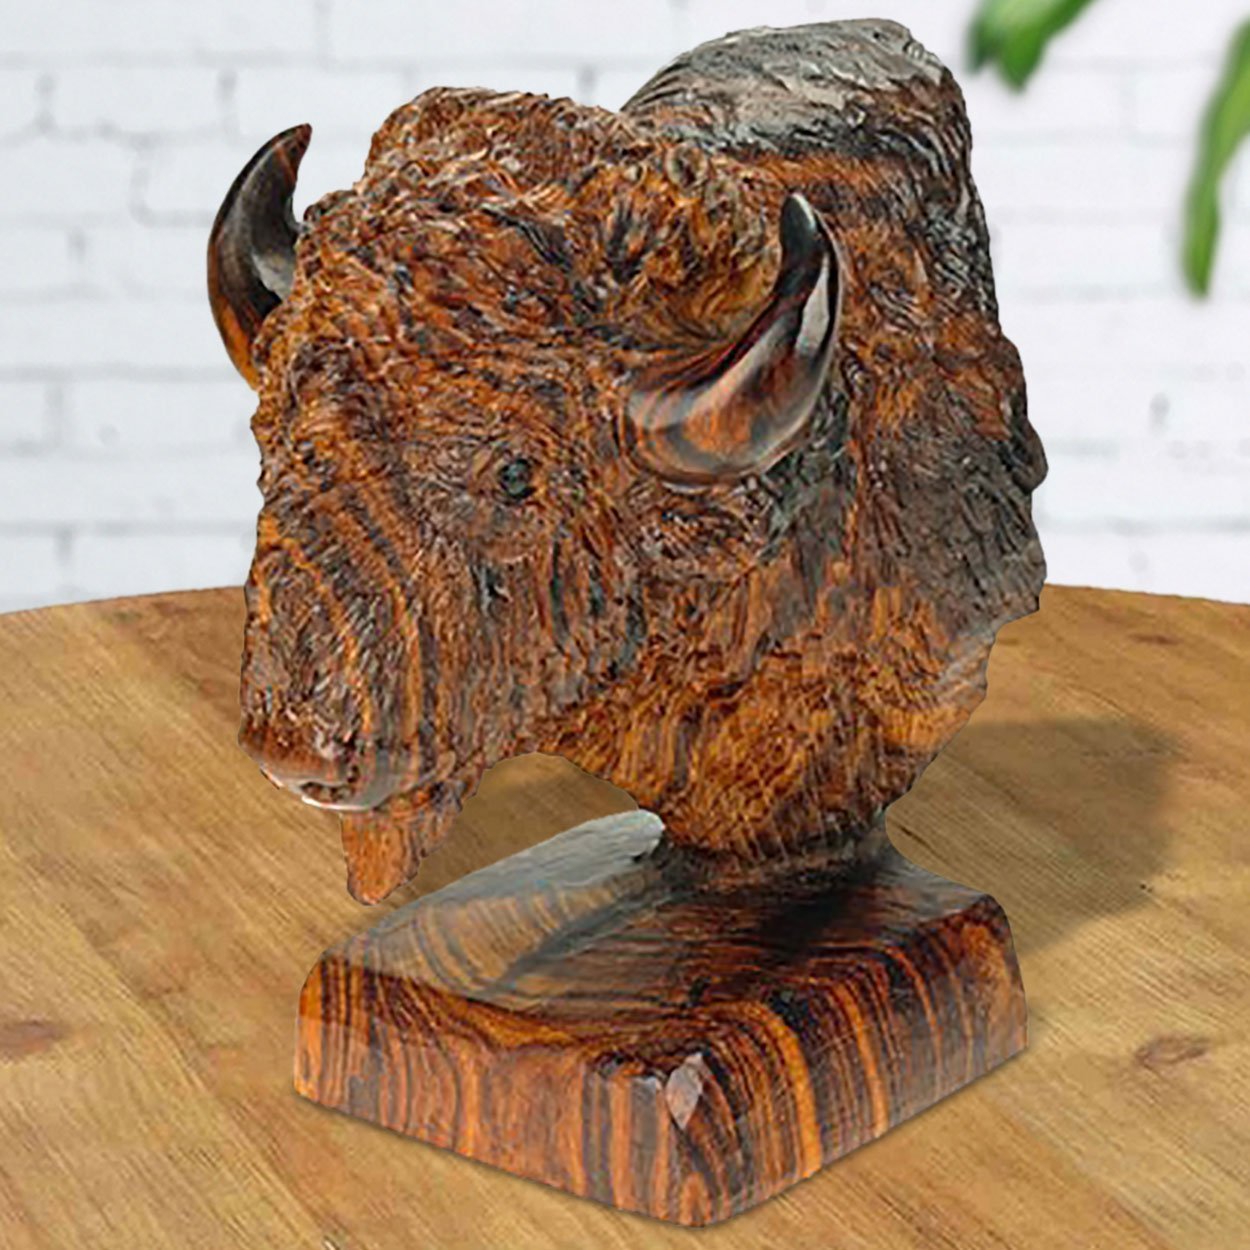 172120 - 6in Tall Buffalo Bust Ironwood Carving